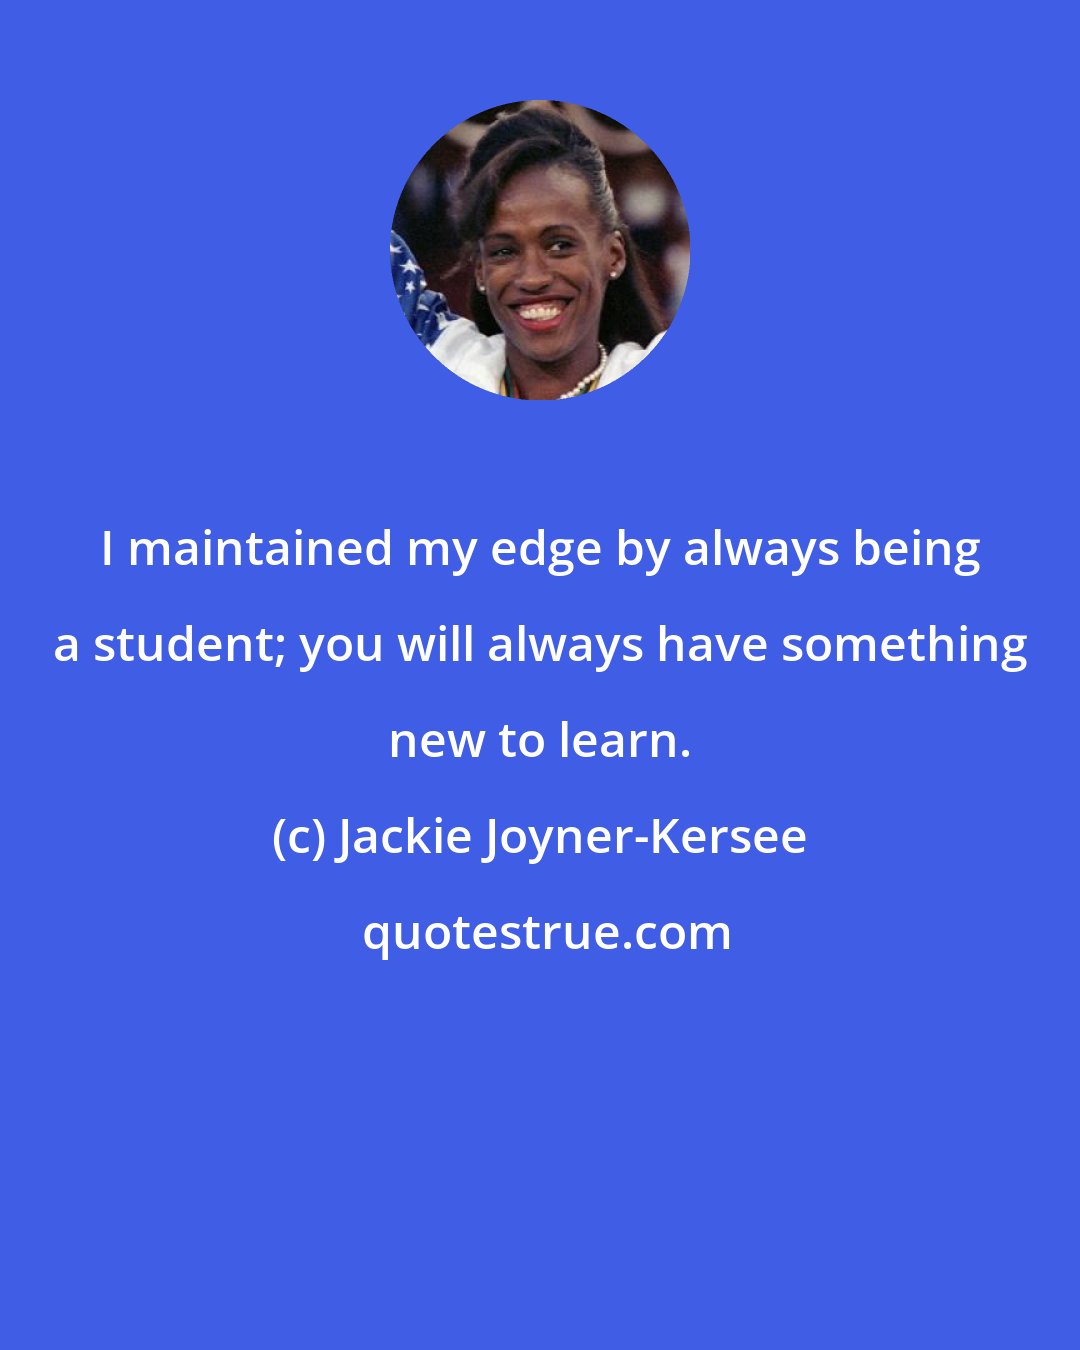 Jackie Joyner-Kersee: I maintained my edge by always being a student; you will always have something new to learn.